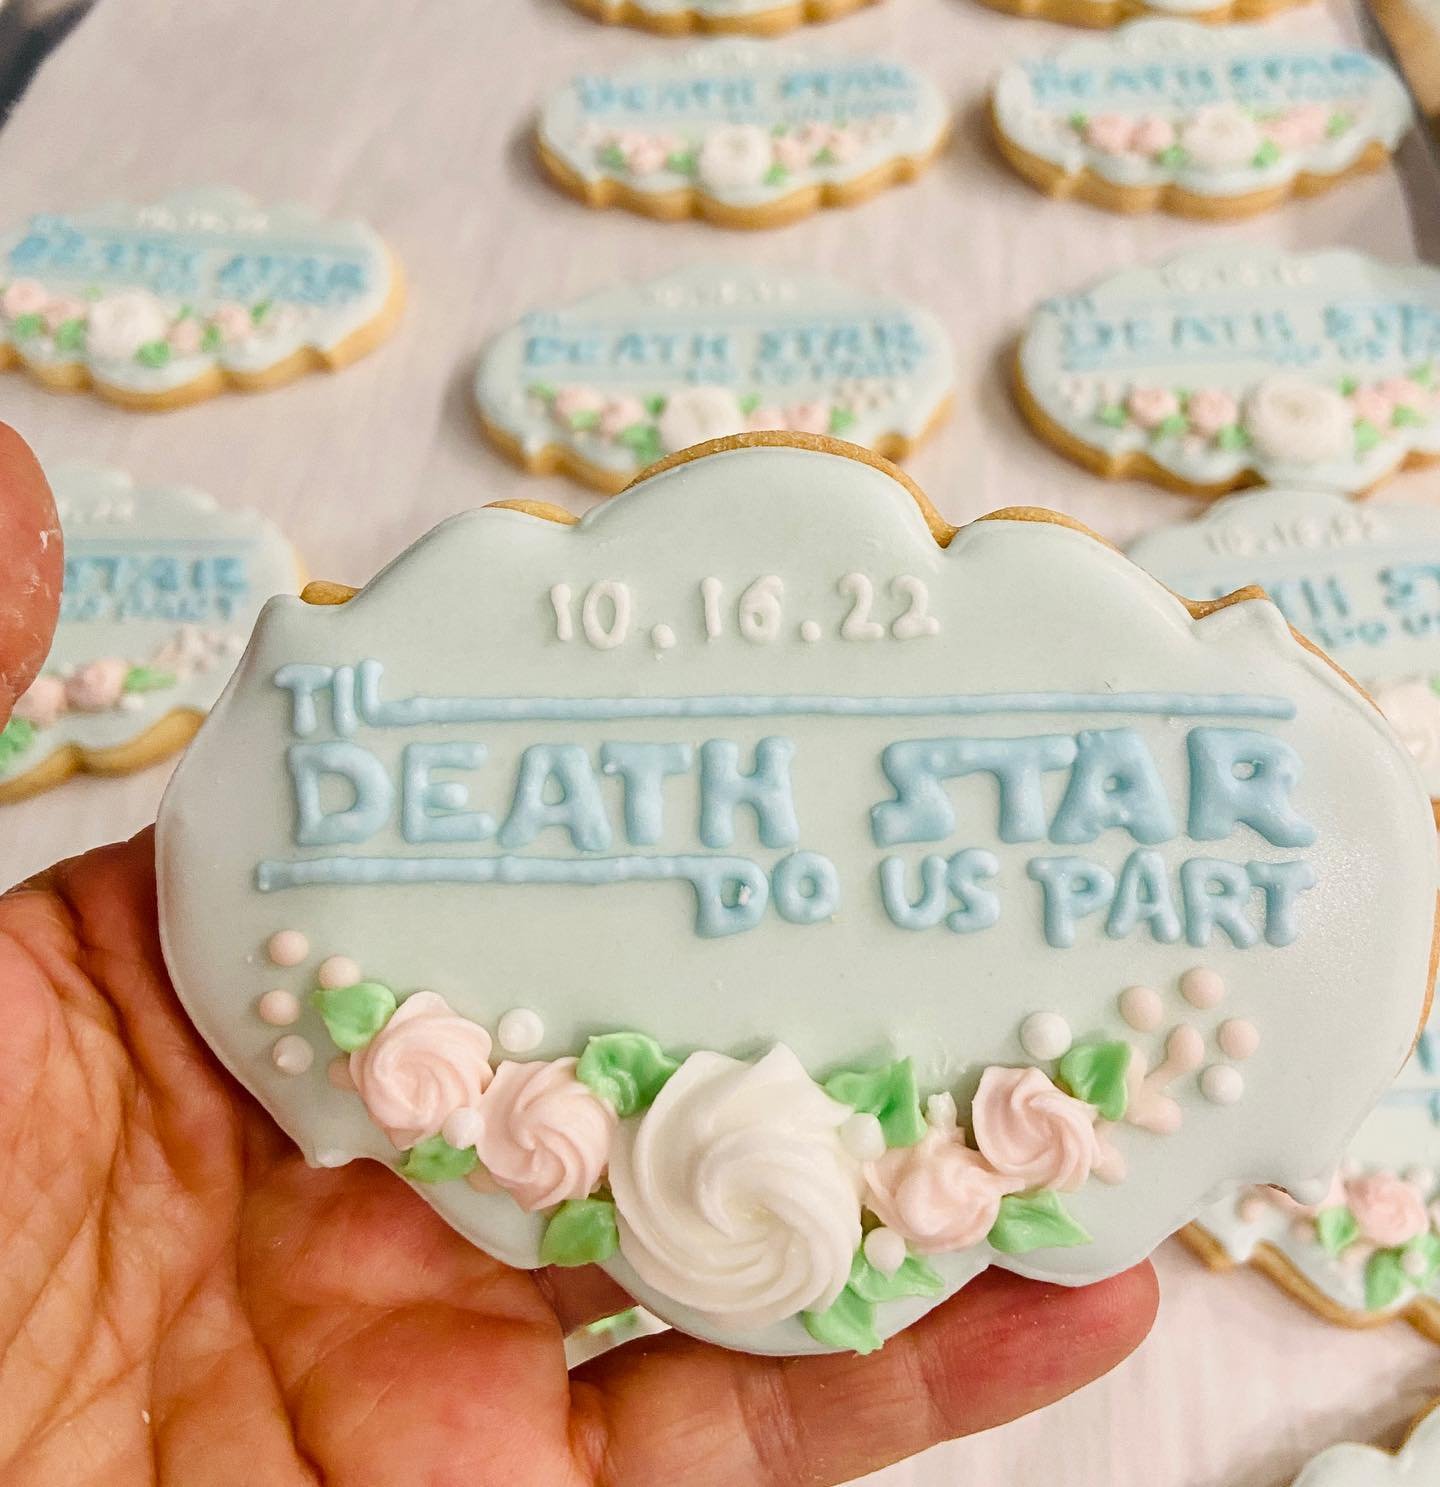 May the force be with you ✨✨✨
.
.
.
.
.
.
.
.
.
.
.
.
.
.
#May#may4th#maythe4thbewithyou#statwars#cookies#decoratedcookies#decoratedcookiesofinstagram#wedding#weddingfavours#local#Toronto#supportsmallbusiness#supportlocal